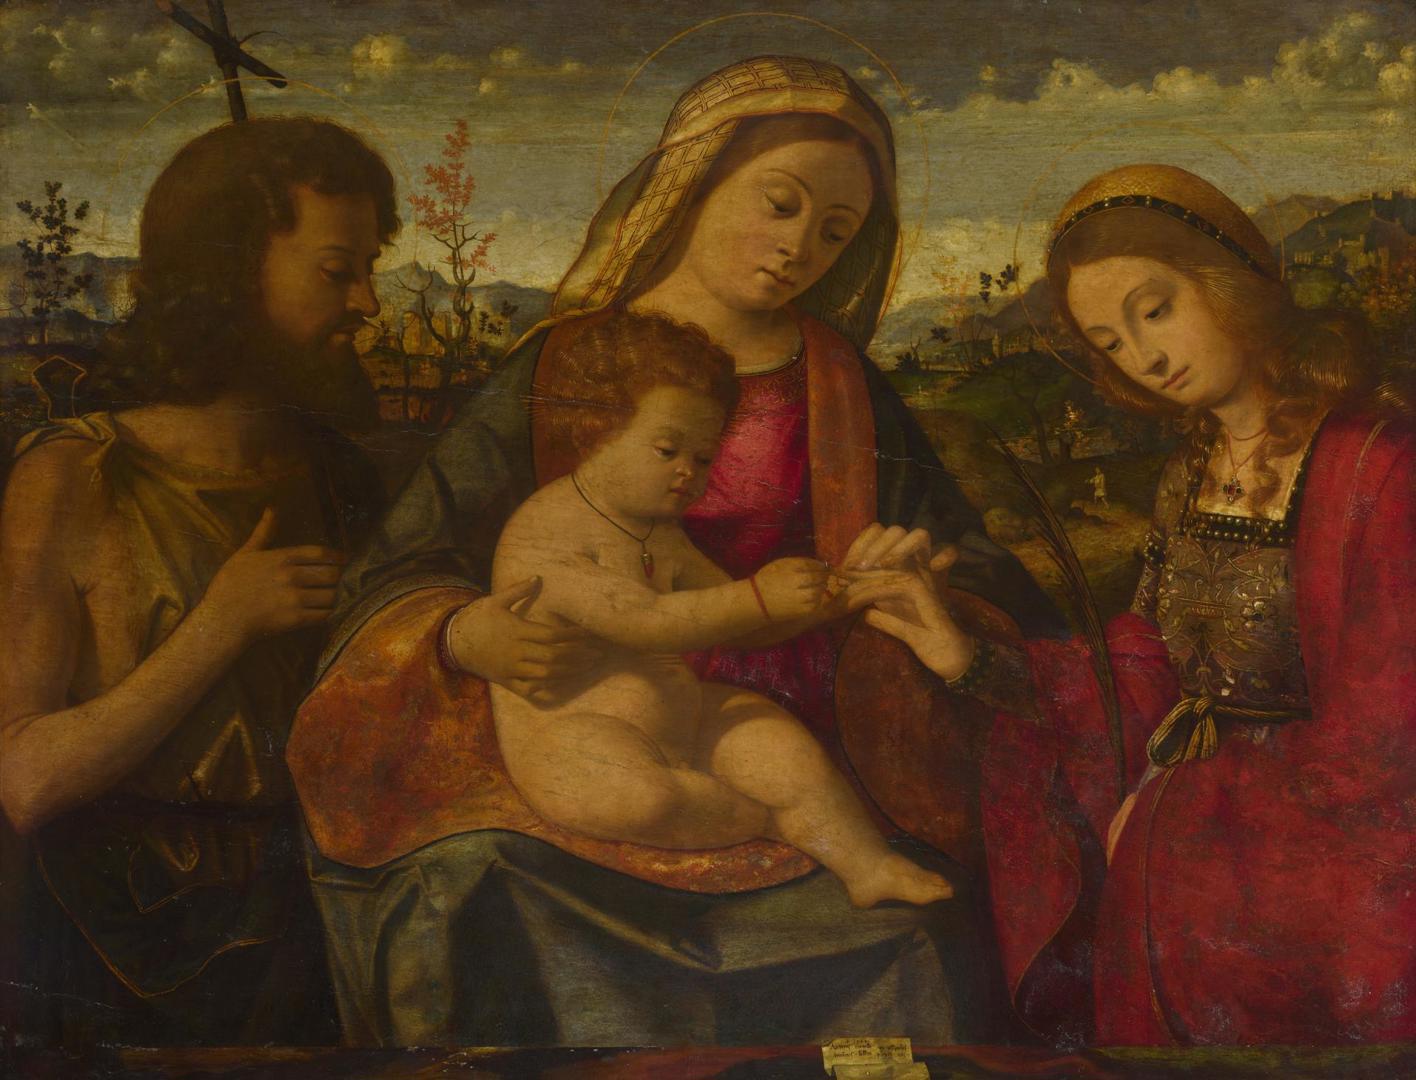 The Virgin and Child with Saints by Andrea Previtali